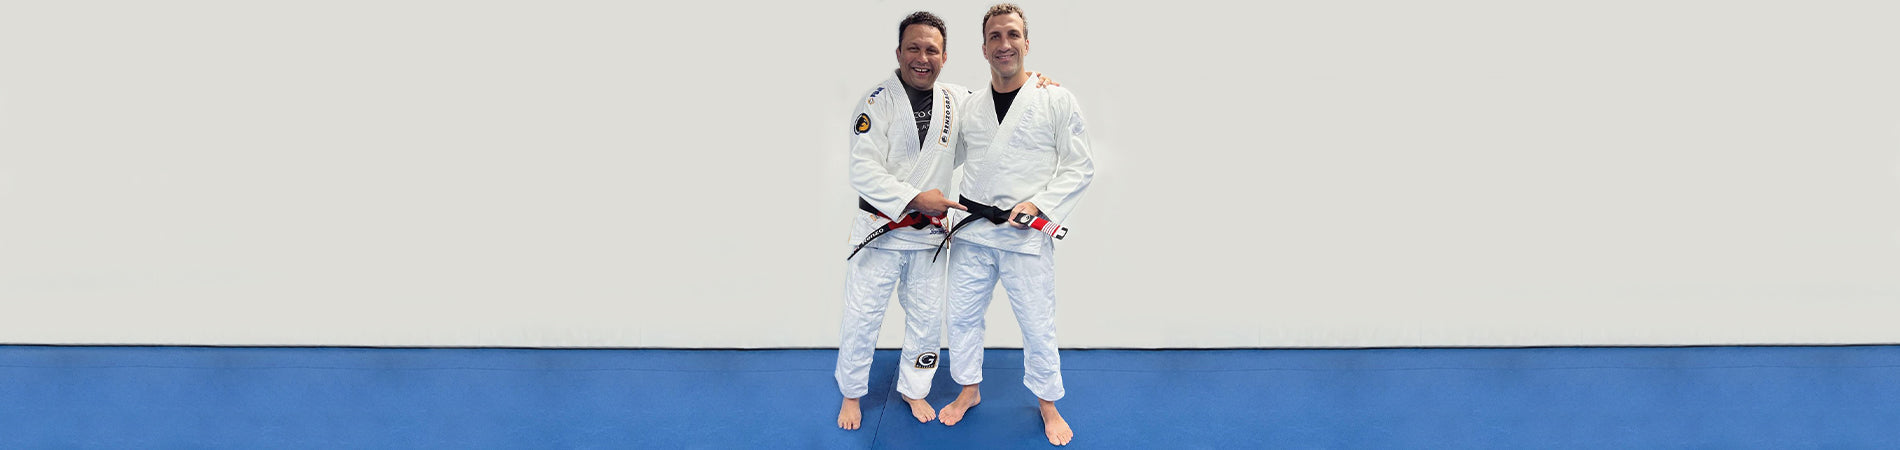 Igor Gracie Promoted to 5th Degree Black Belt by Master Renzo Gracie